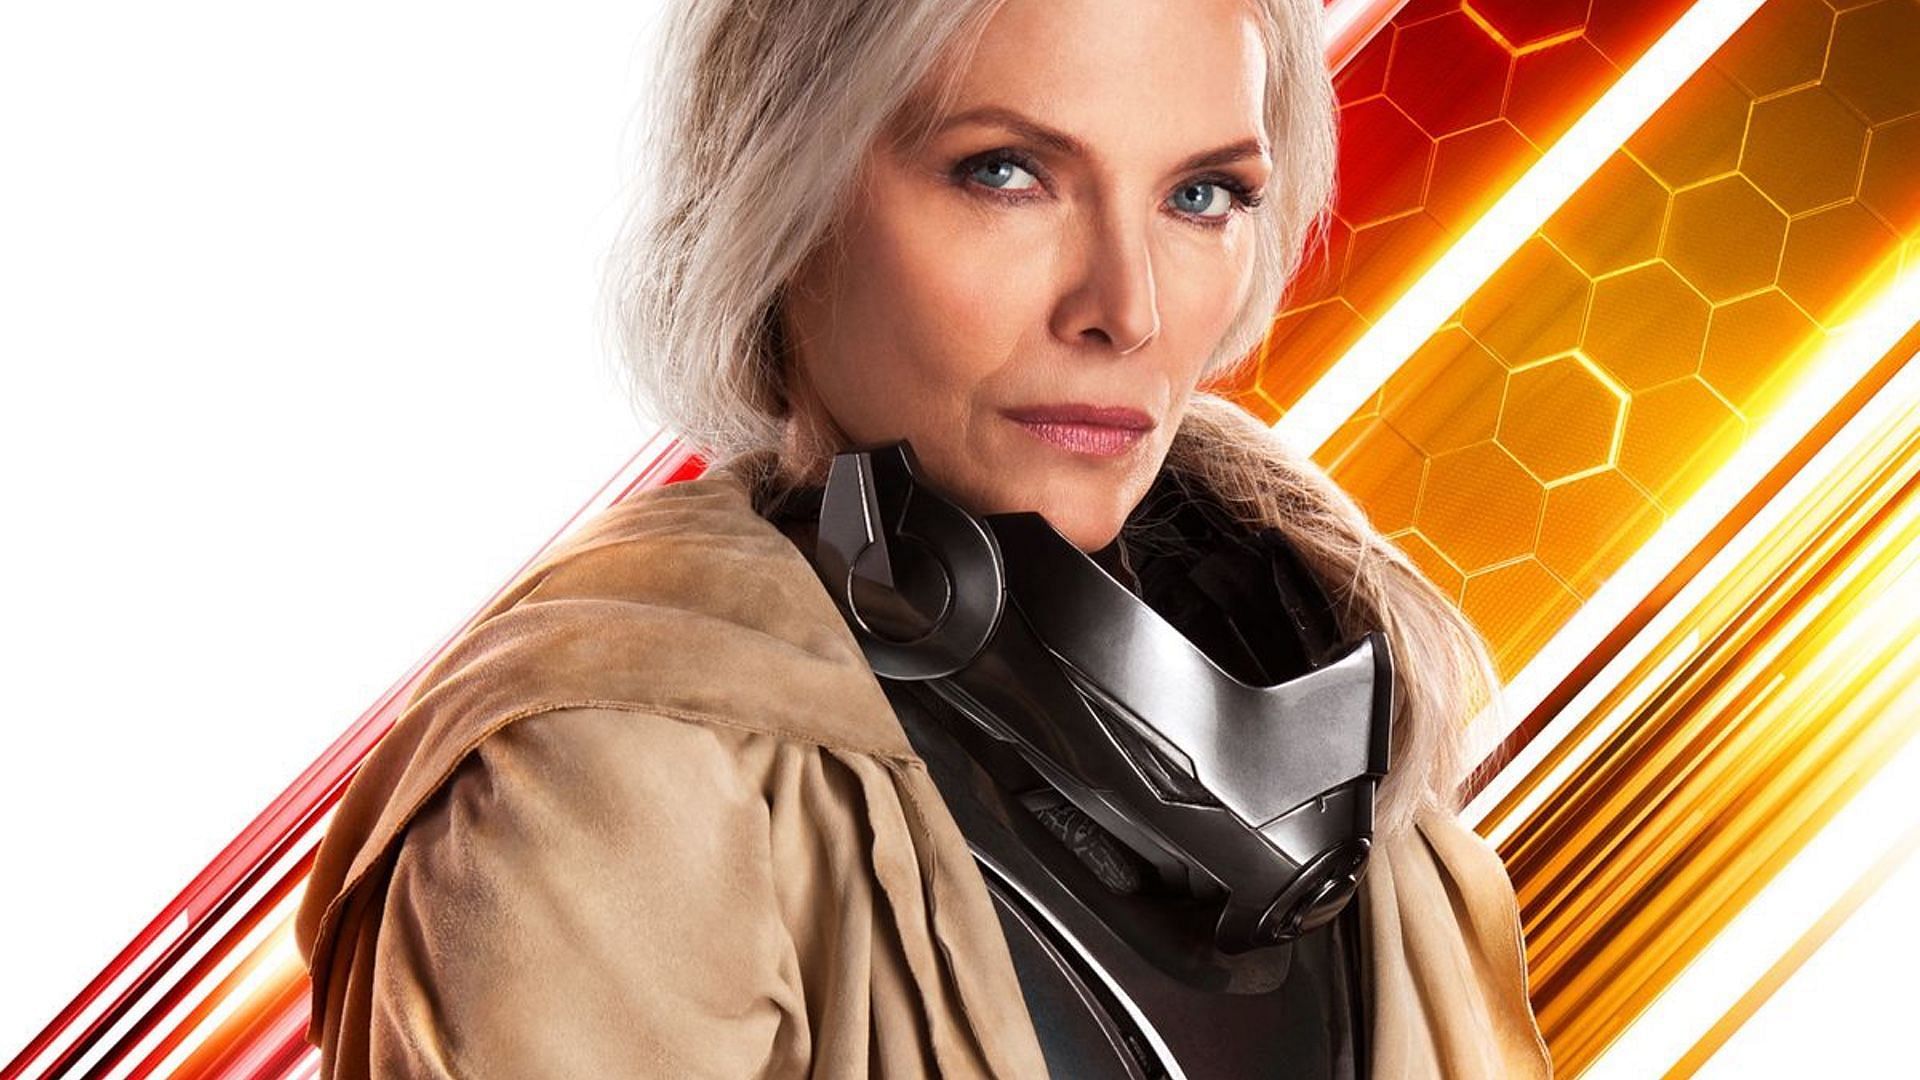 Janet van Dyne character poster from Ant-Man and the Wasp (Image credit: Marvel Studios)